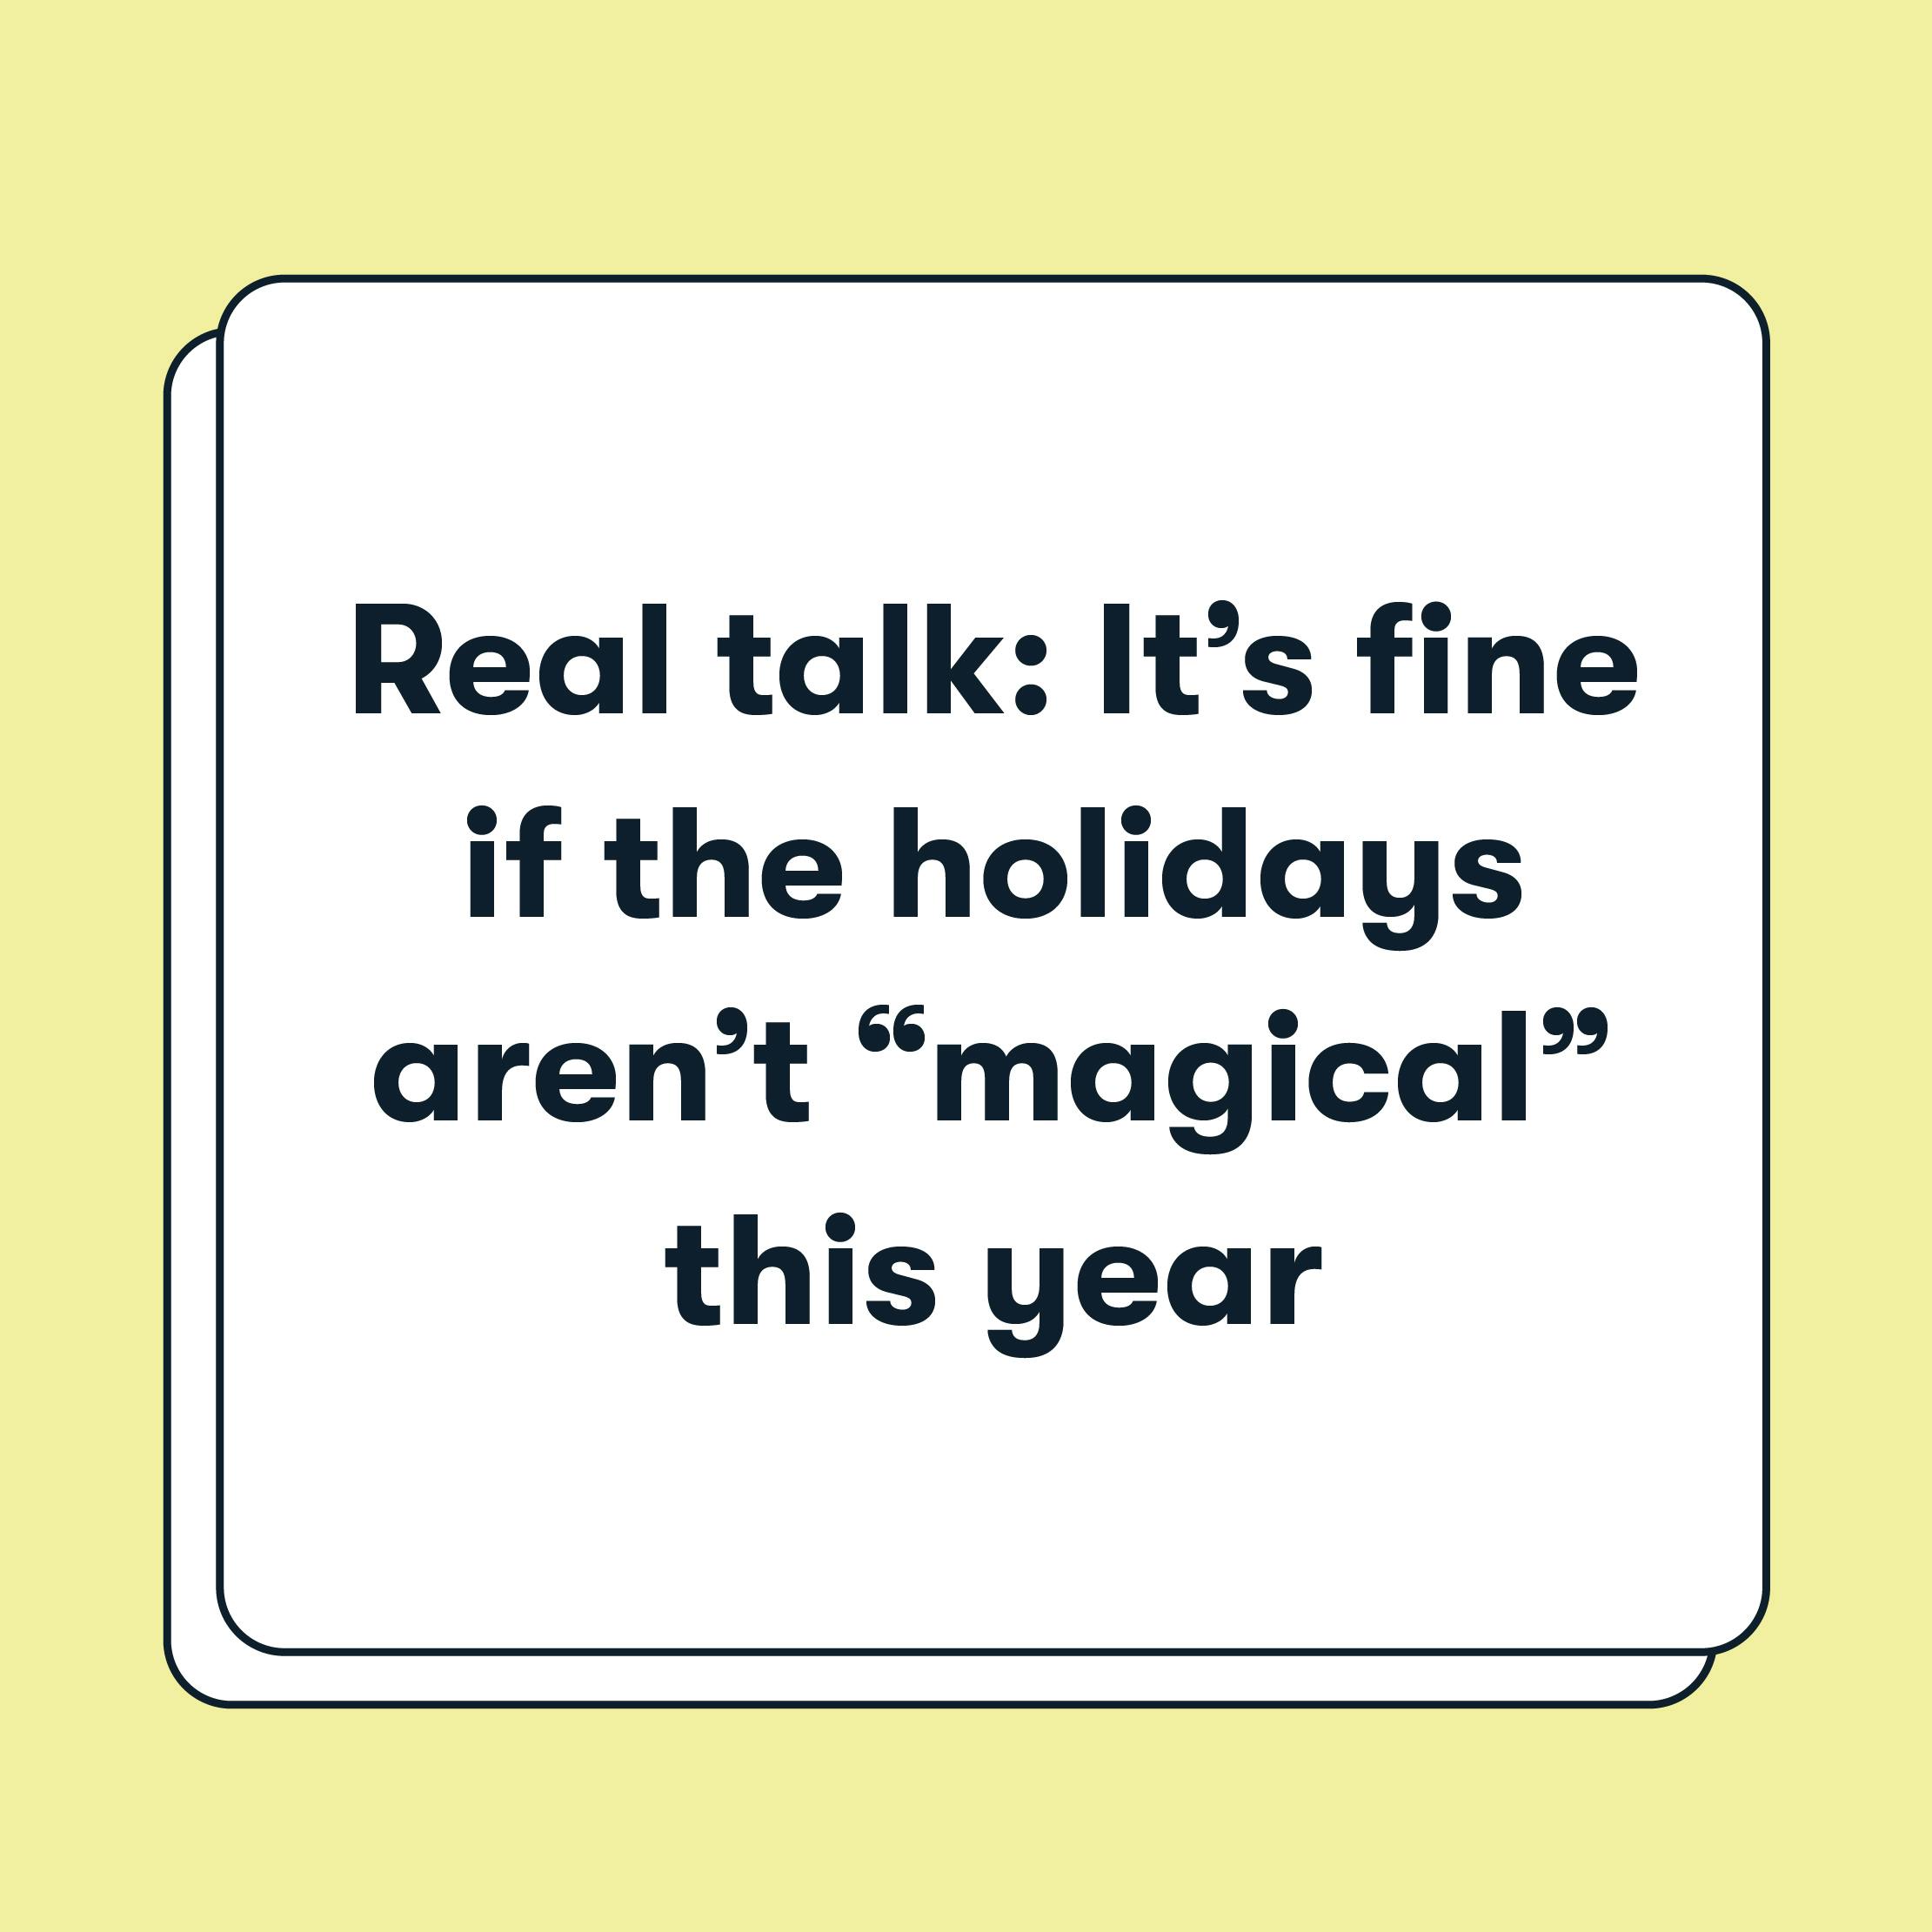 Real talk: it's fine if the holidays aren't magical this year